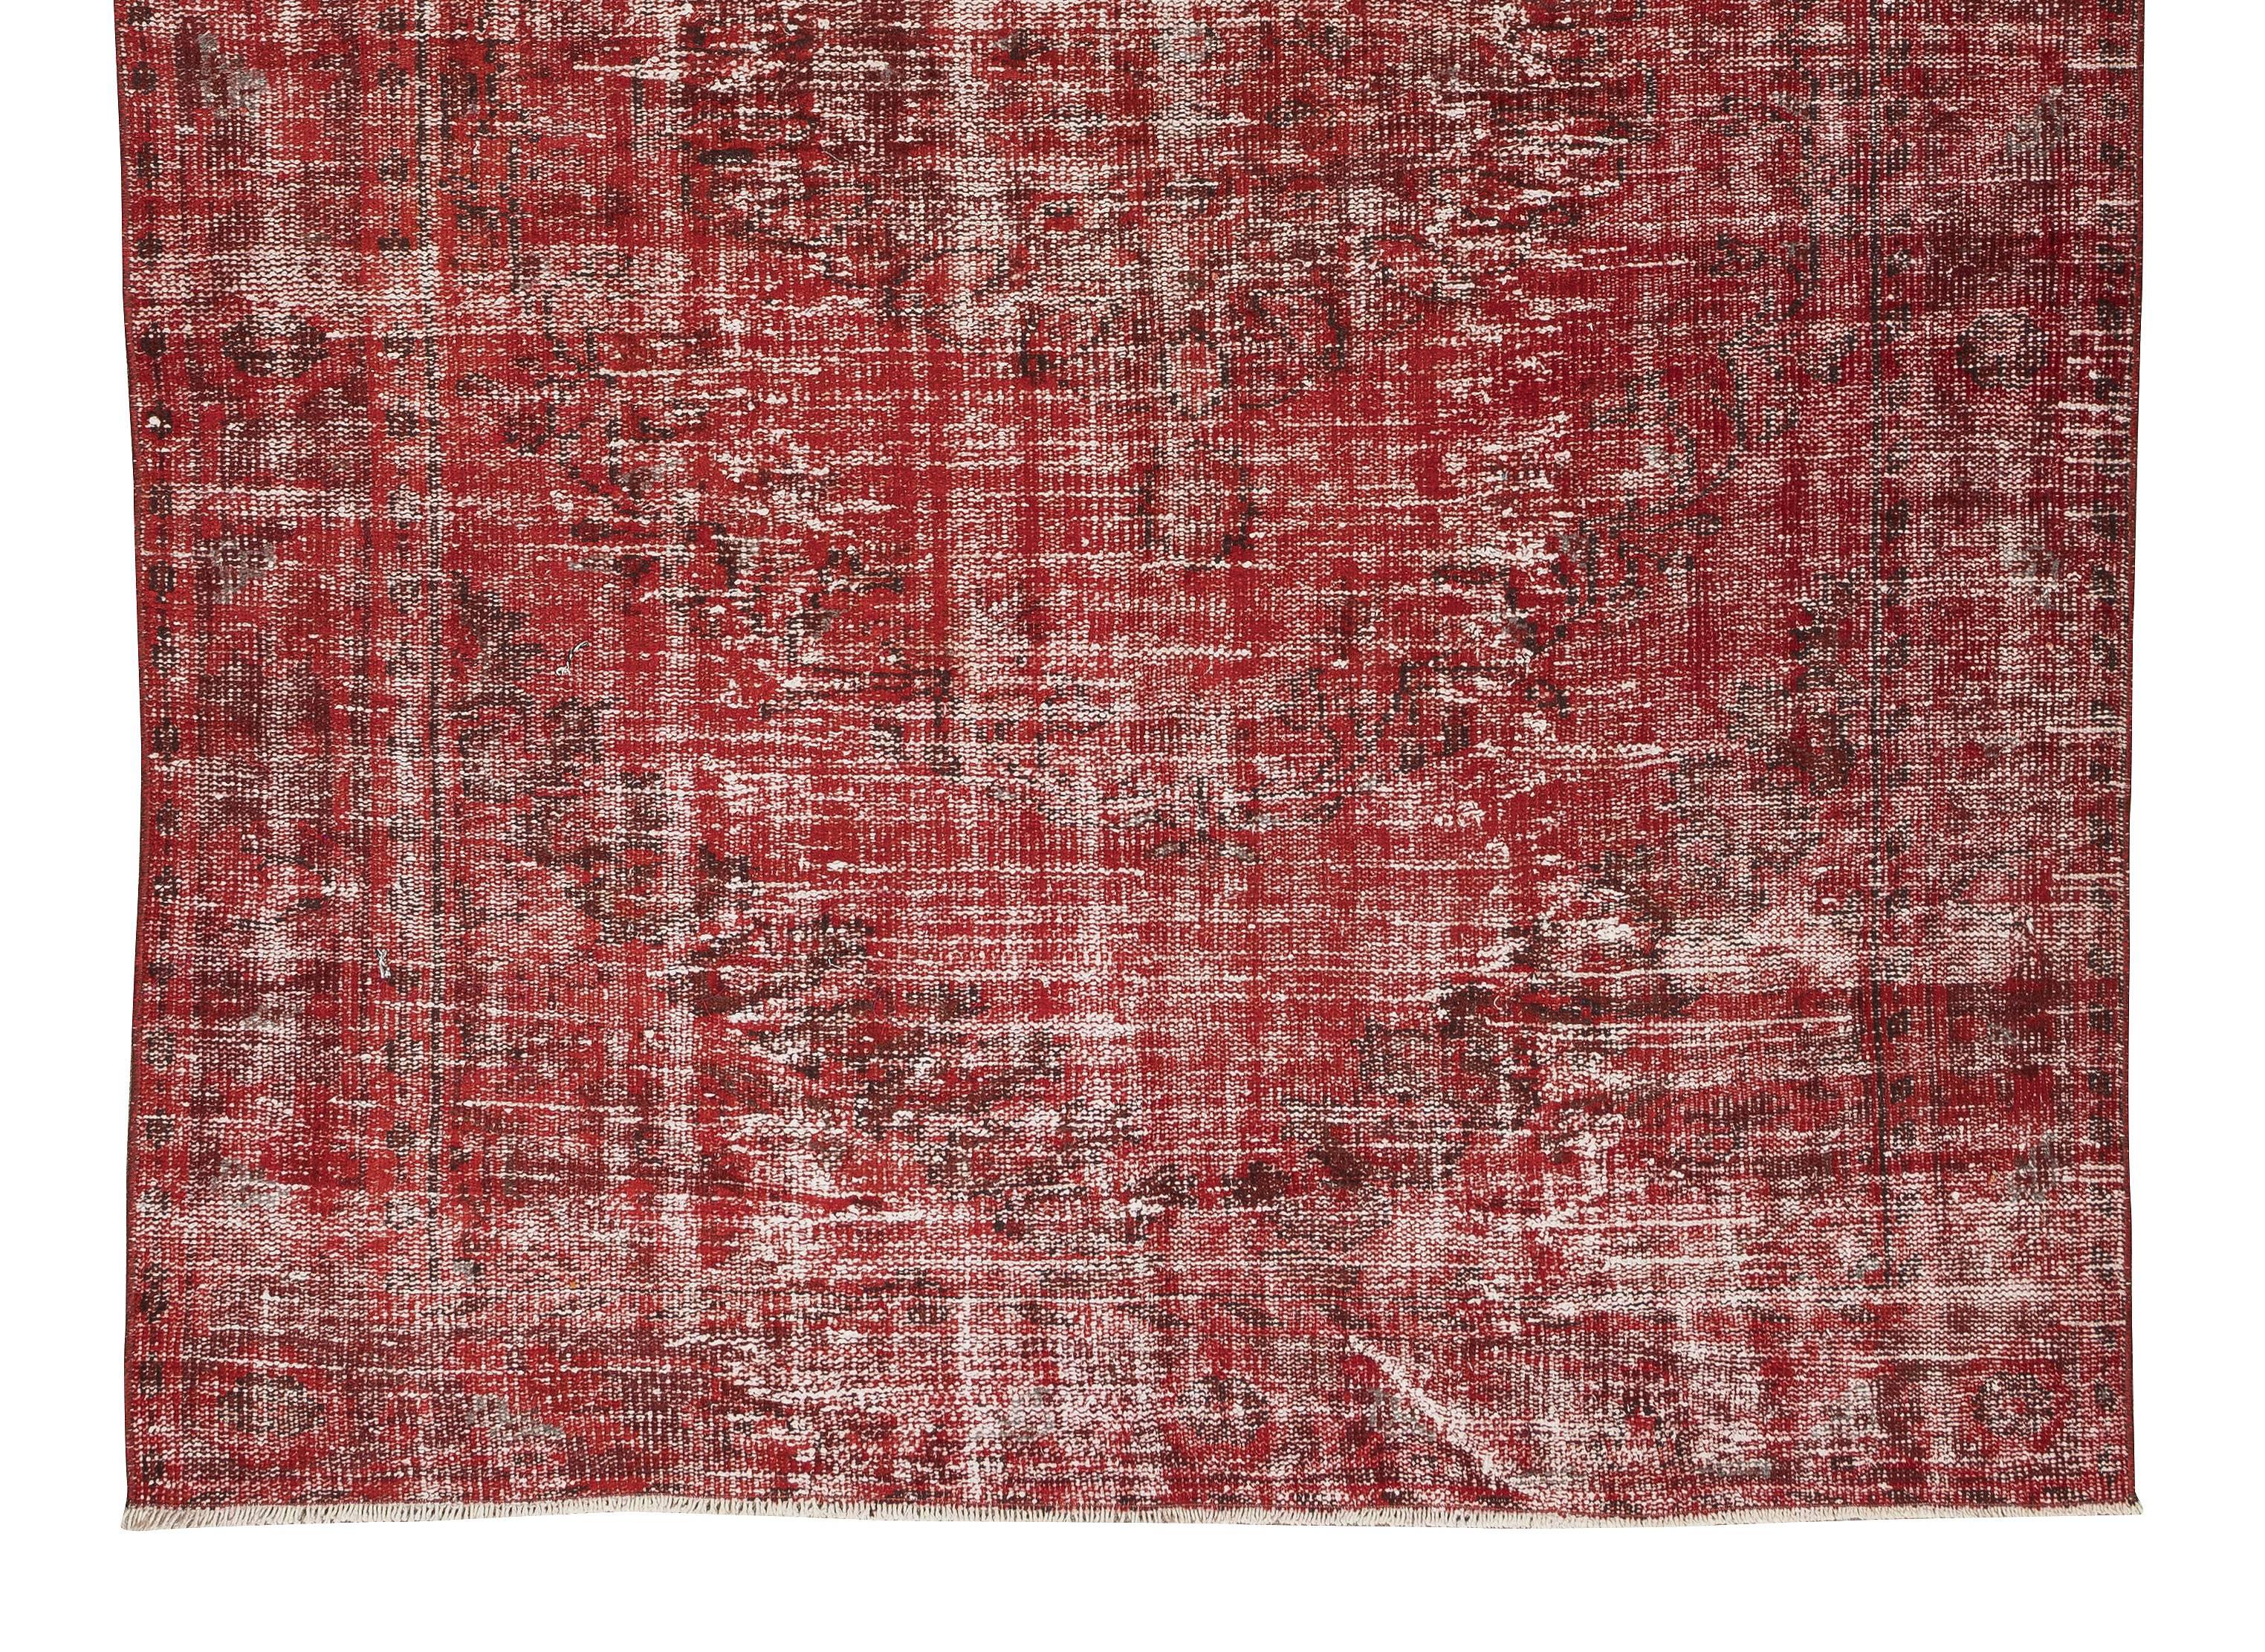 Handmade Shabby Chic Turkish Vintage Wool Area Rug in Burgundy Red In Good Condition For Sale In Philadelphia, PA